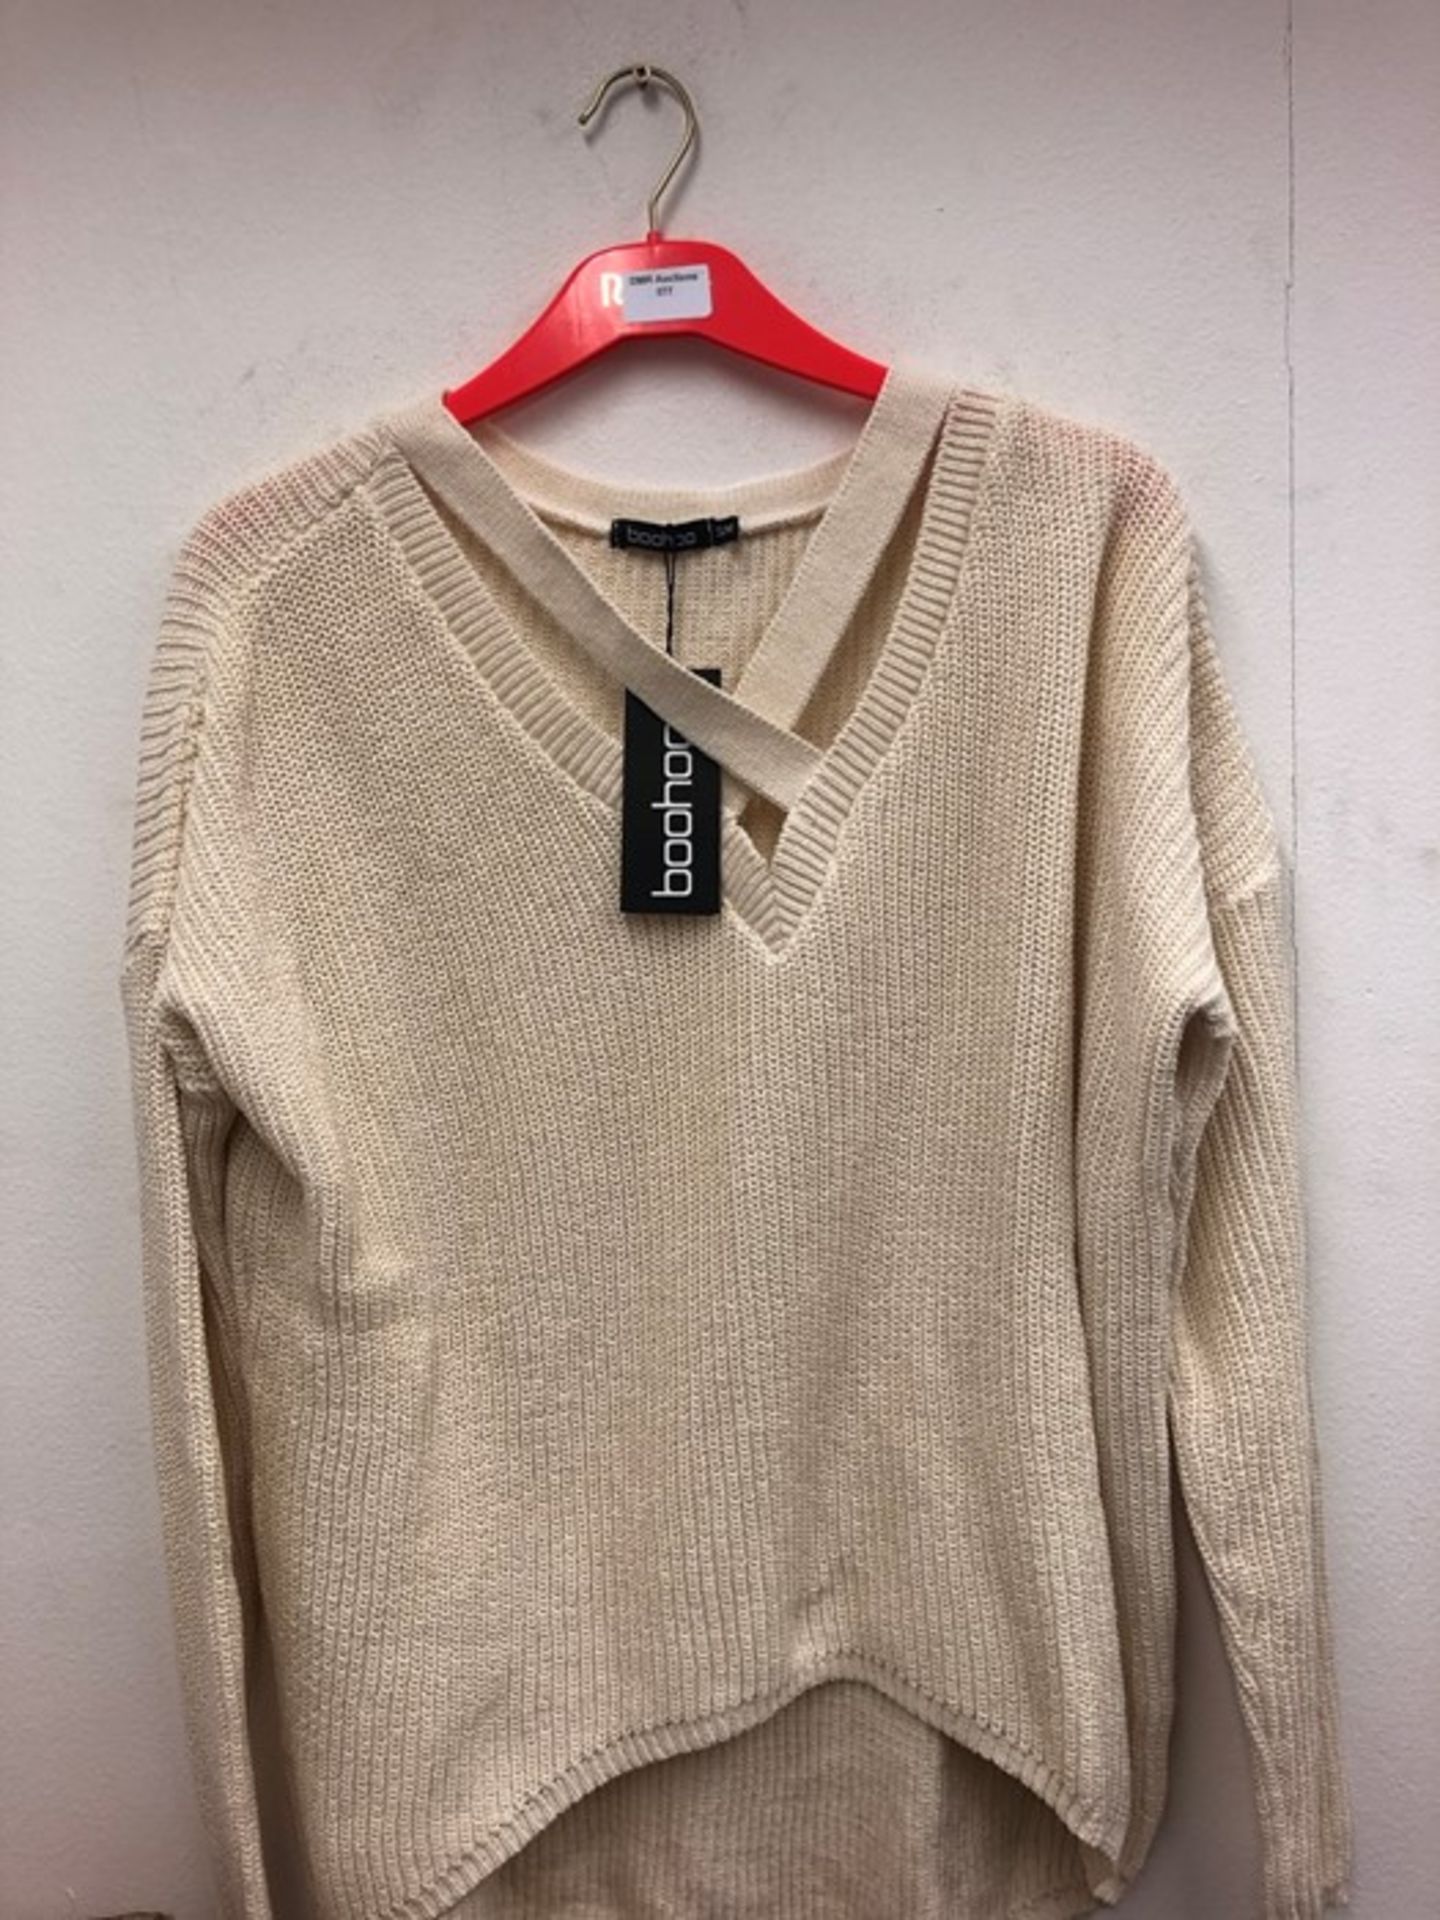 1 BOOHOO LACEY OVERSIZED STRAP NECK JUMPER IN CREAM / SIZE - S / M (VIEWING HIGHLY RECOMMENDED)